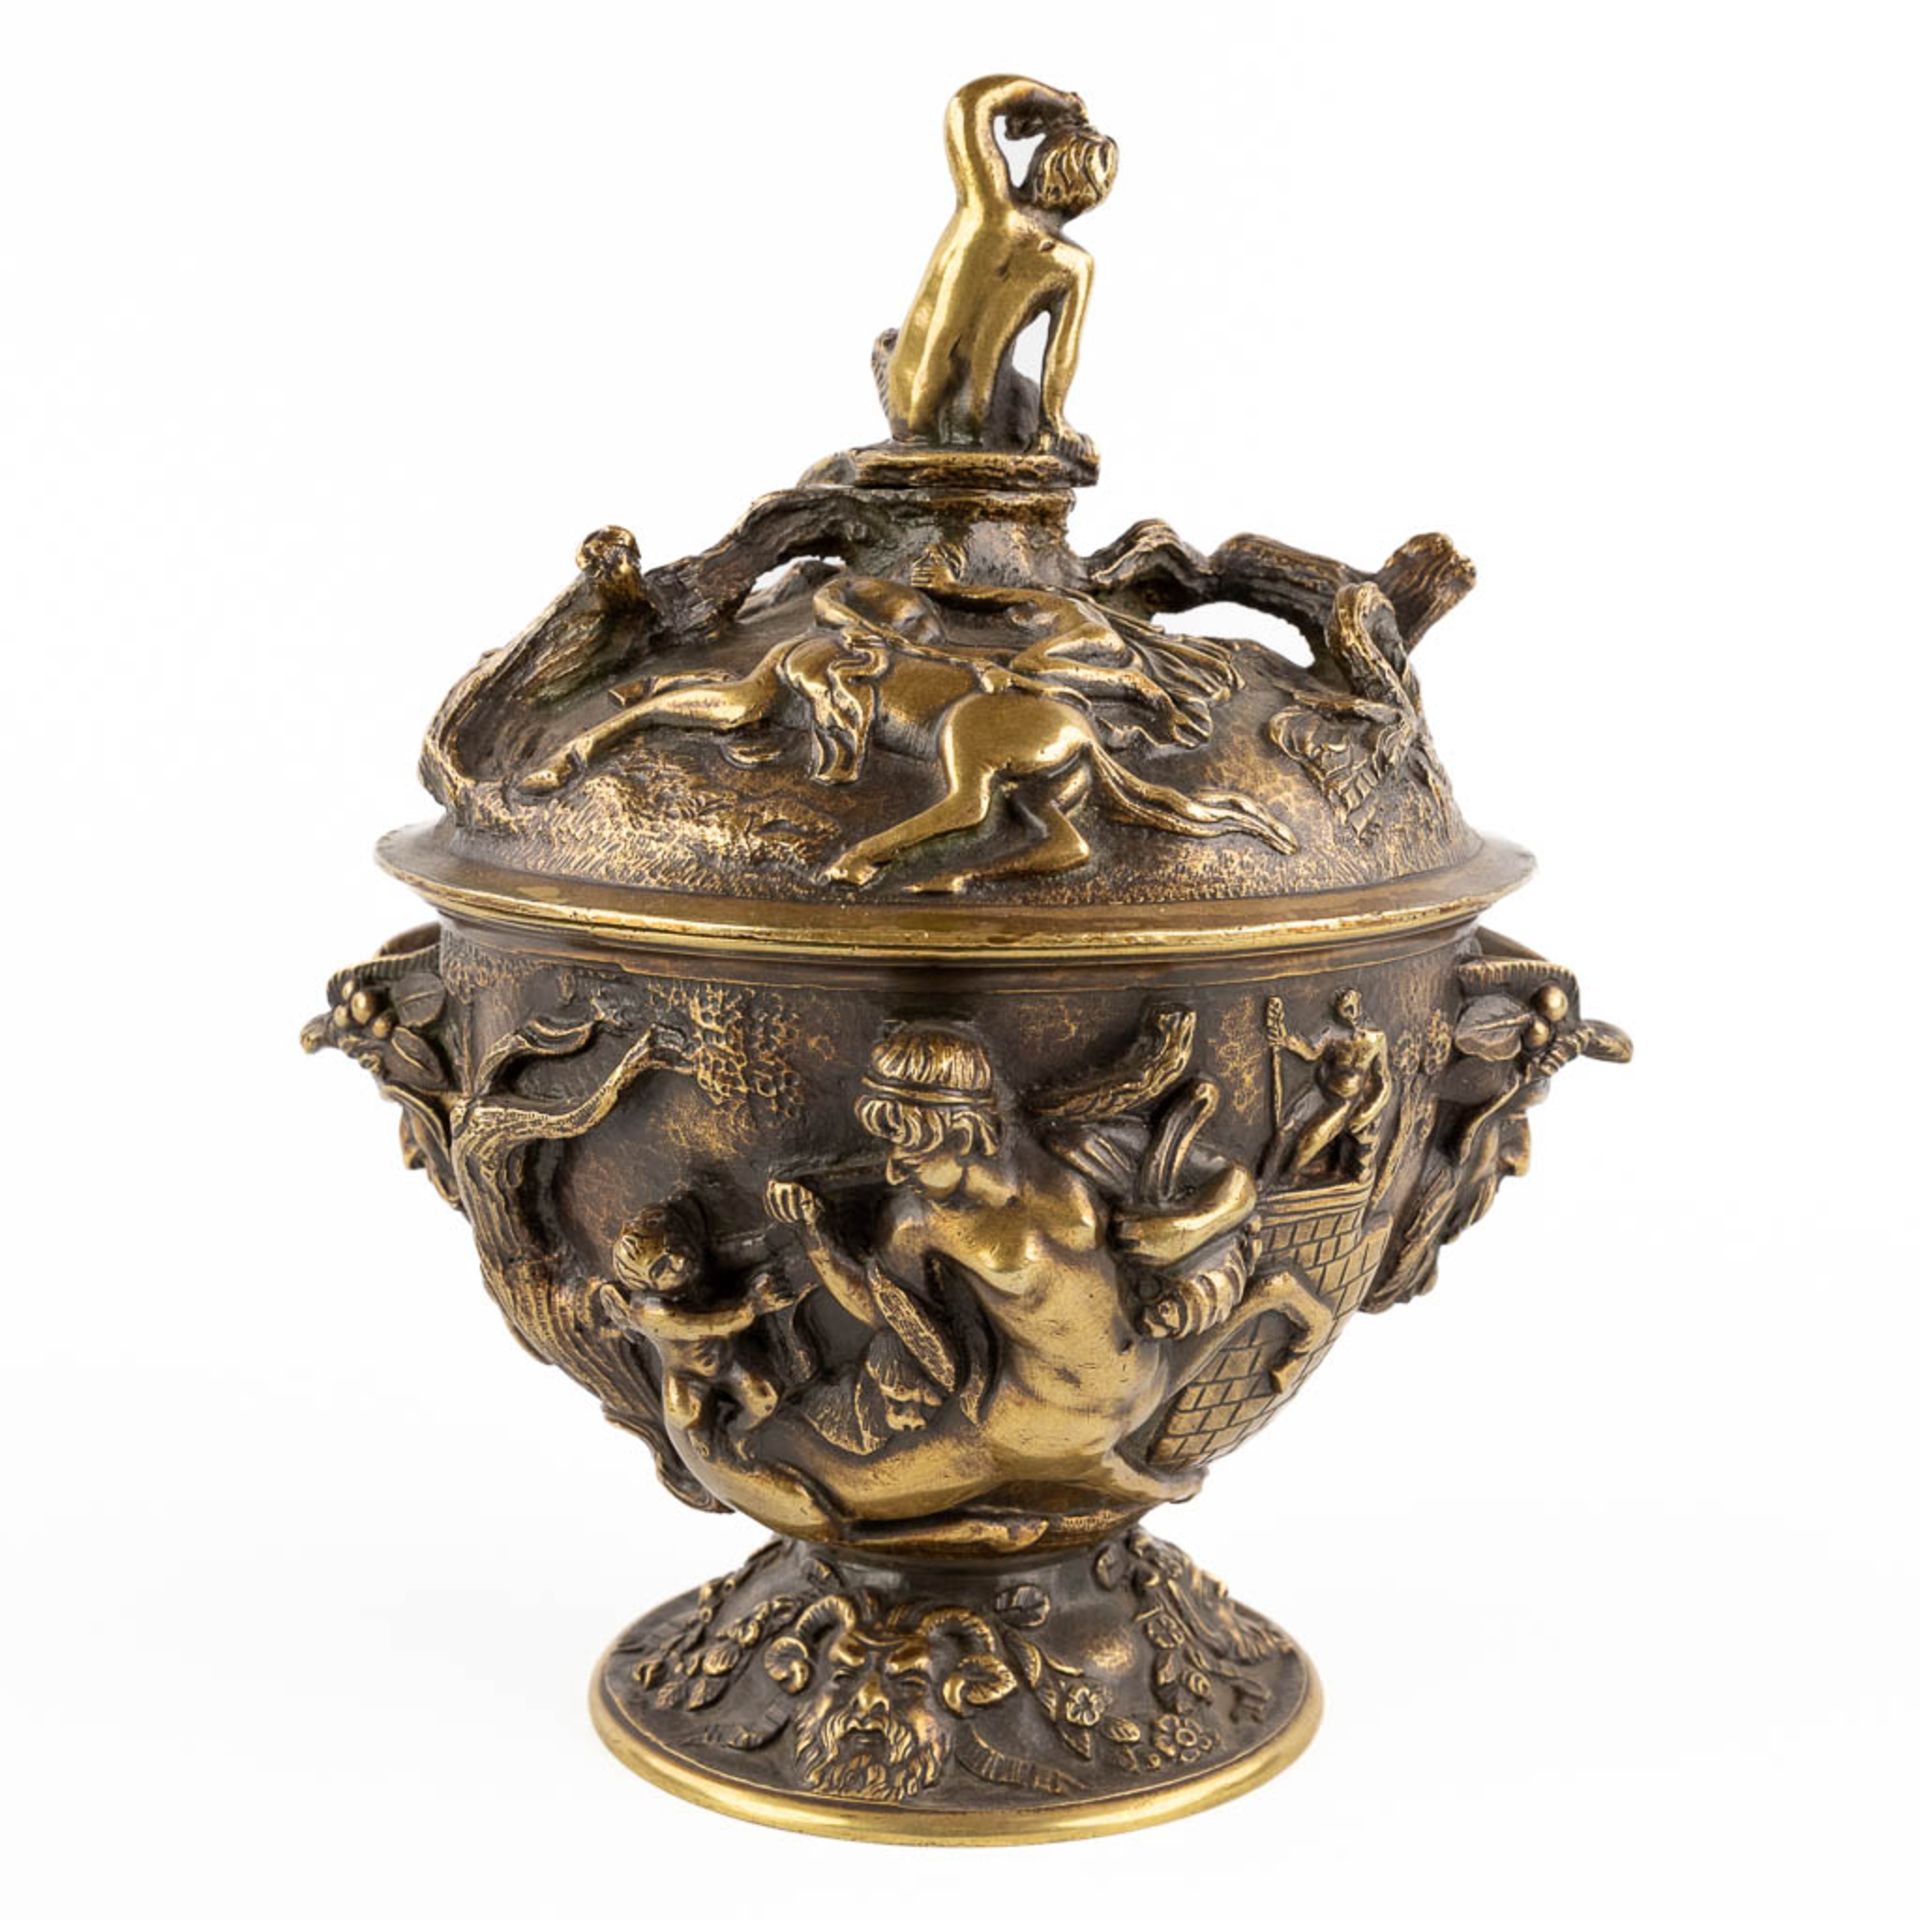 A pot with a lid, decorated with mythological figurines, patinated bronze. (H:23 x D:16 cm) - Image 5 of 16